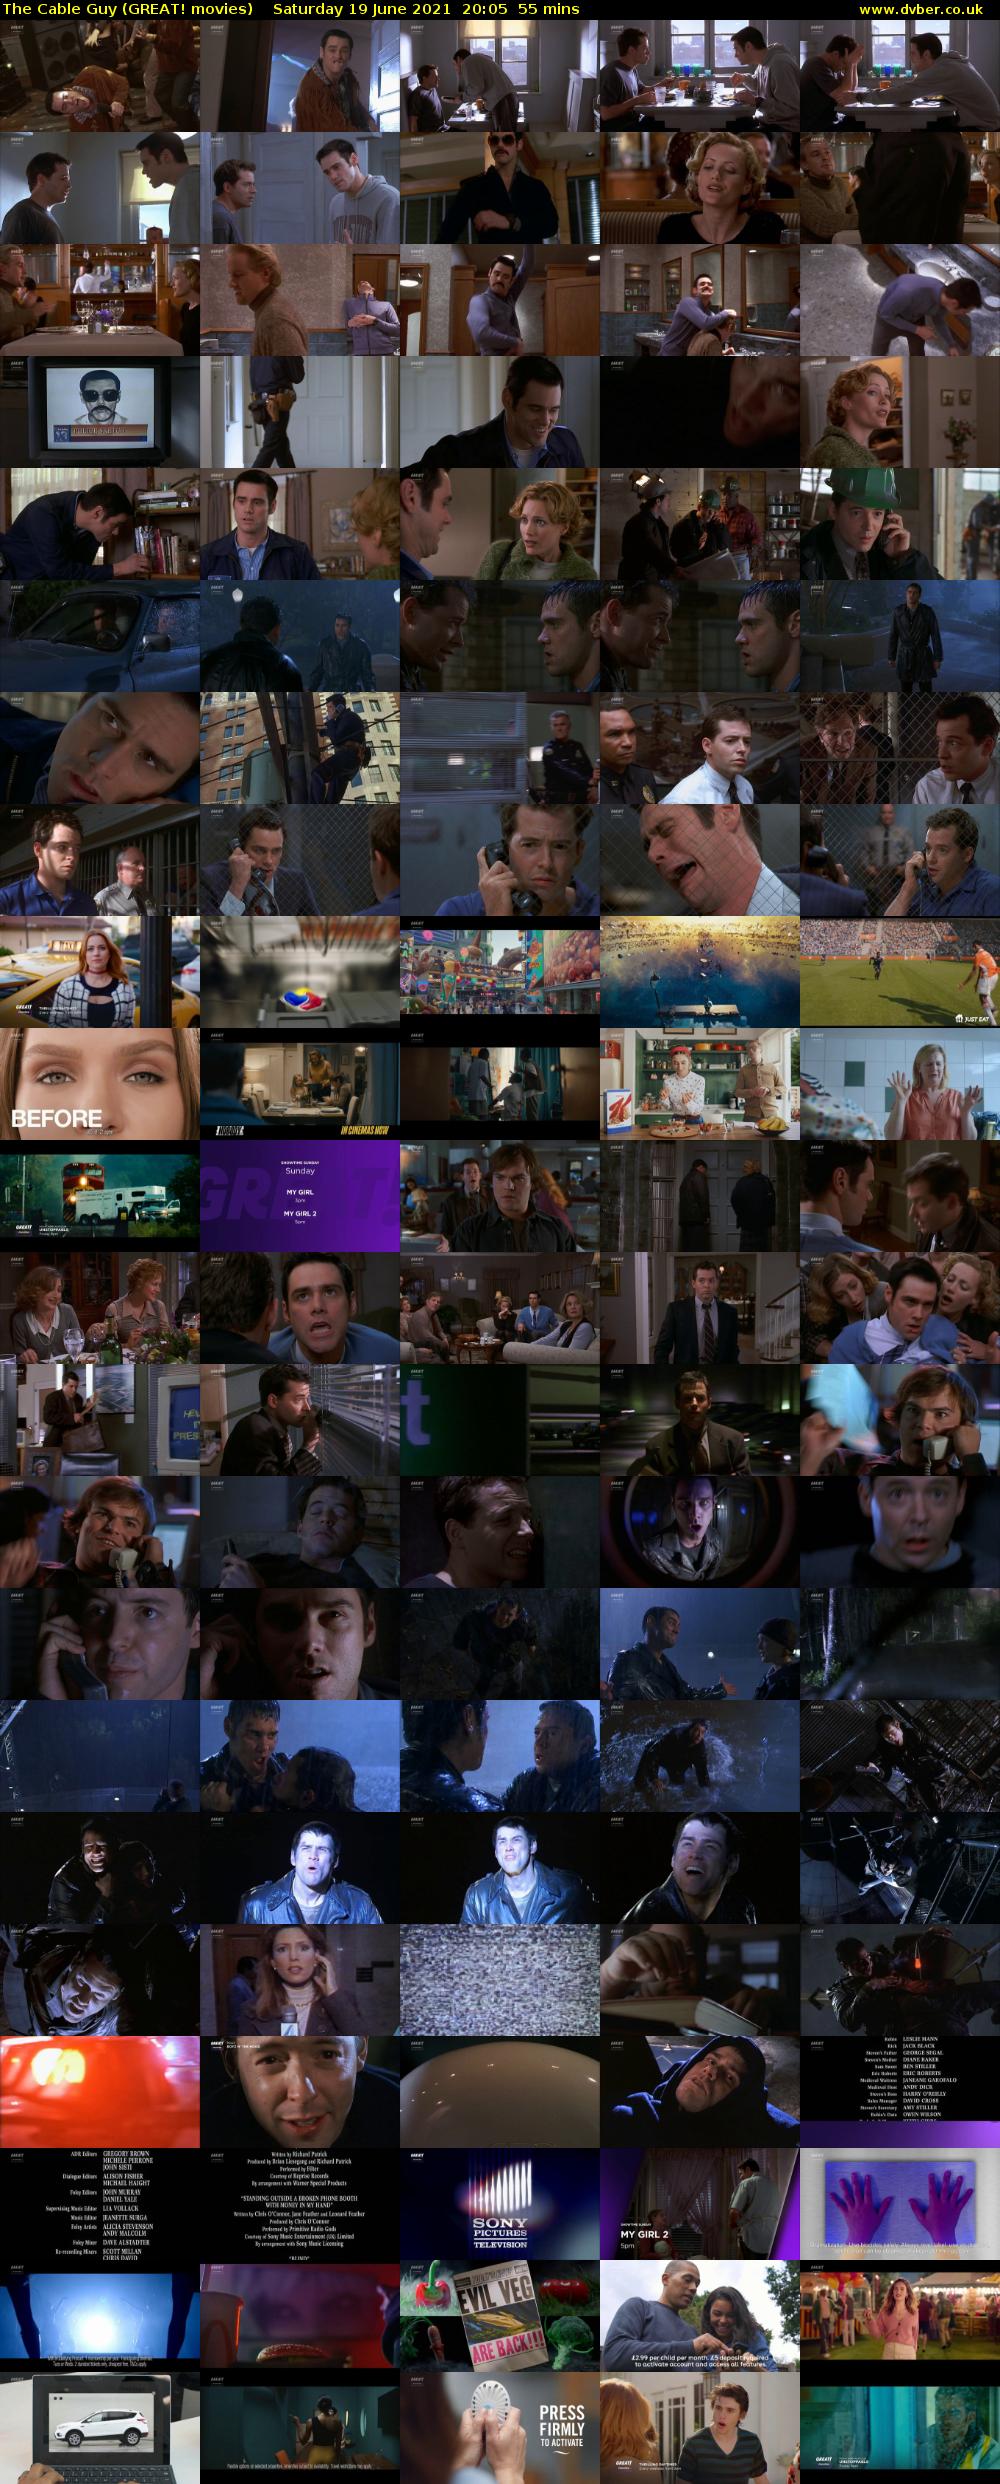 The Cable Guy (GREAT! movies) Saturday 19 June 2021 20:05 - 21:00